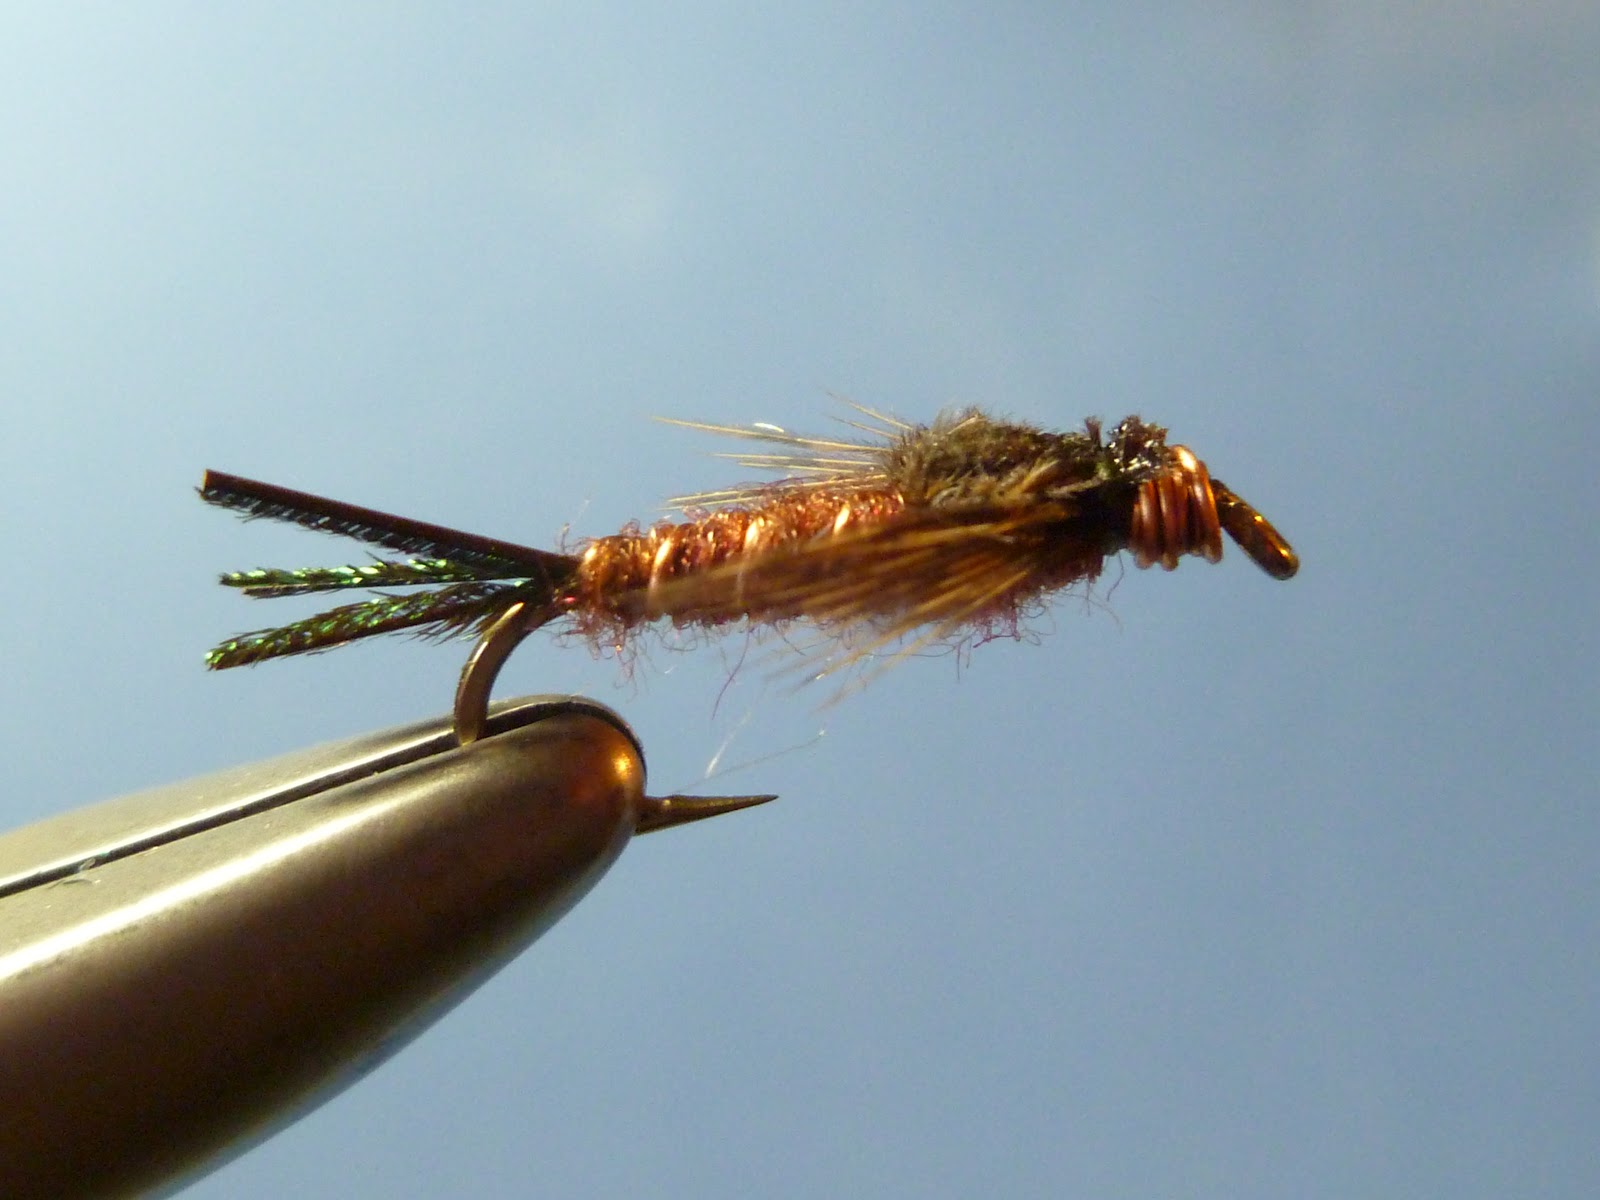 55 on the fly: tying the Isonychia Nymph